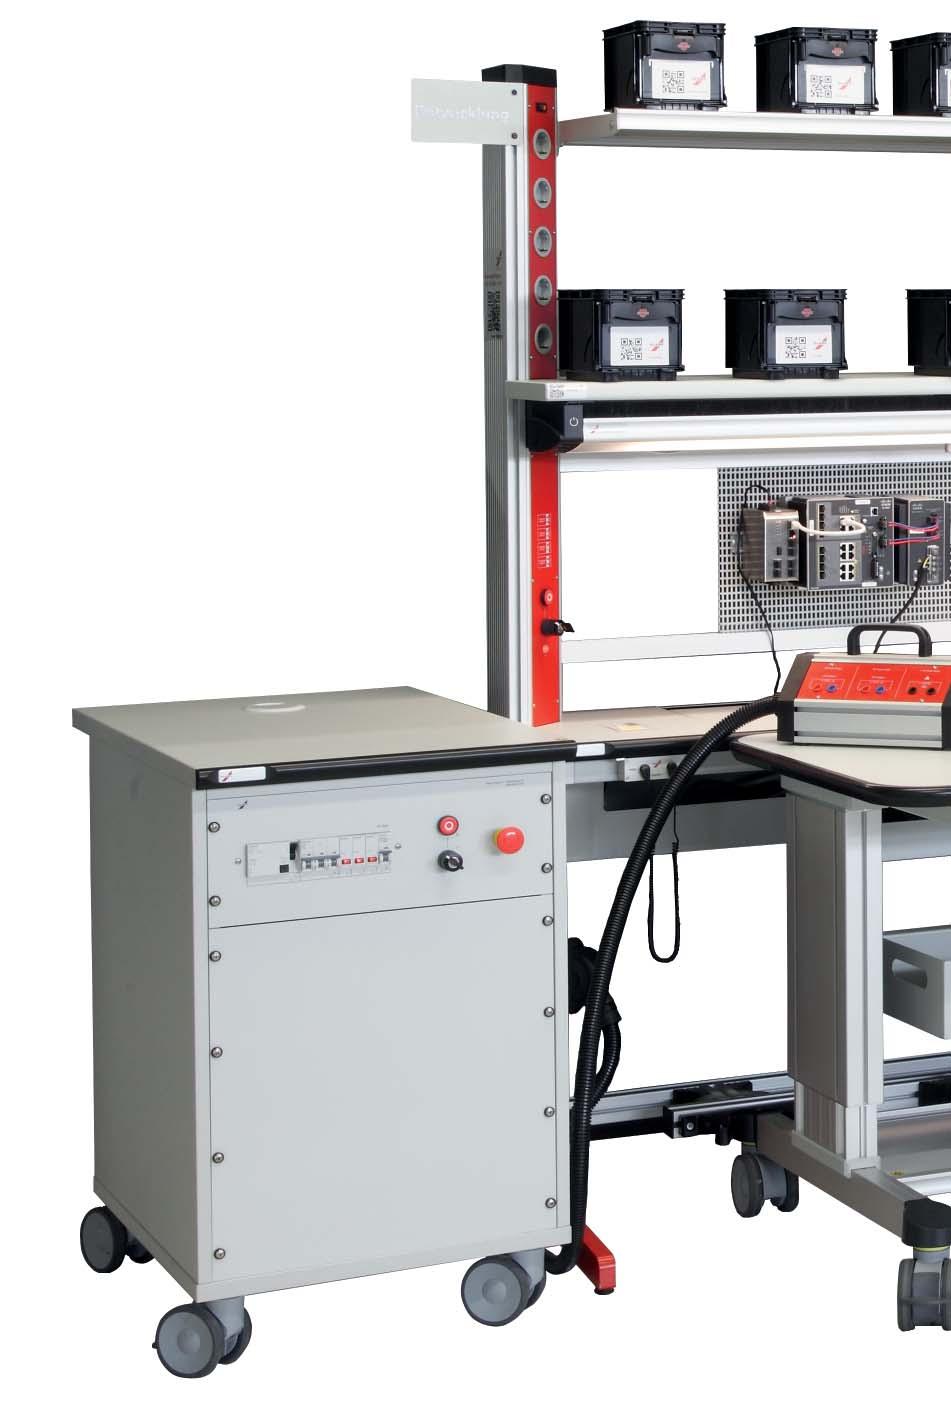 CIS - Connected Industry System Our new innovative CIS system with GABT functional elements Base unit Connection unit Operating unit Technology unit proves itself